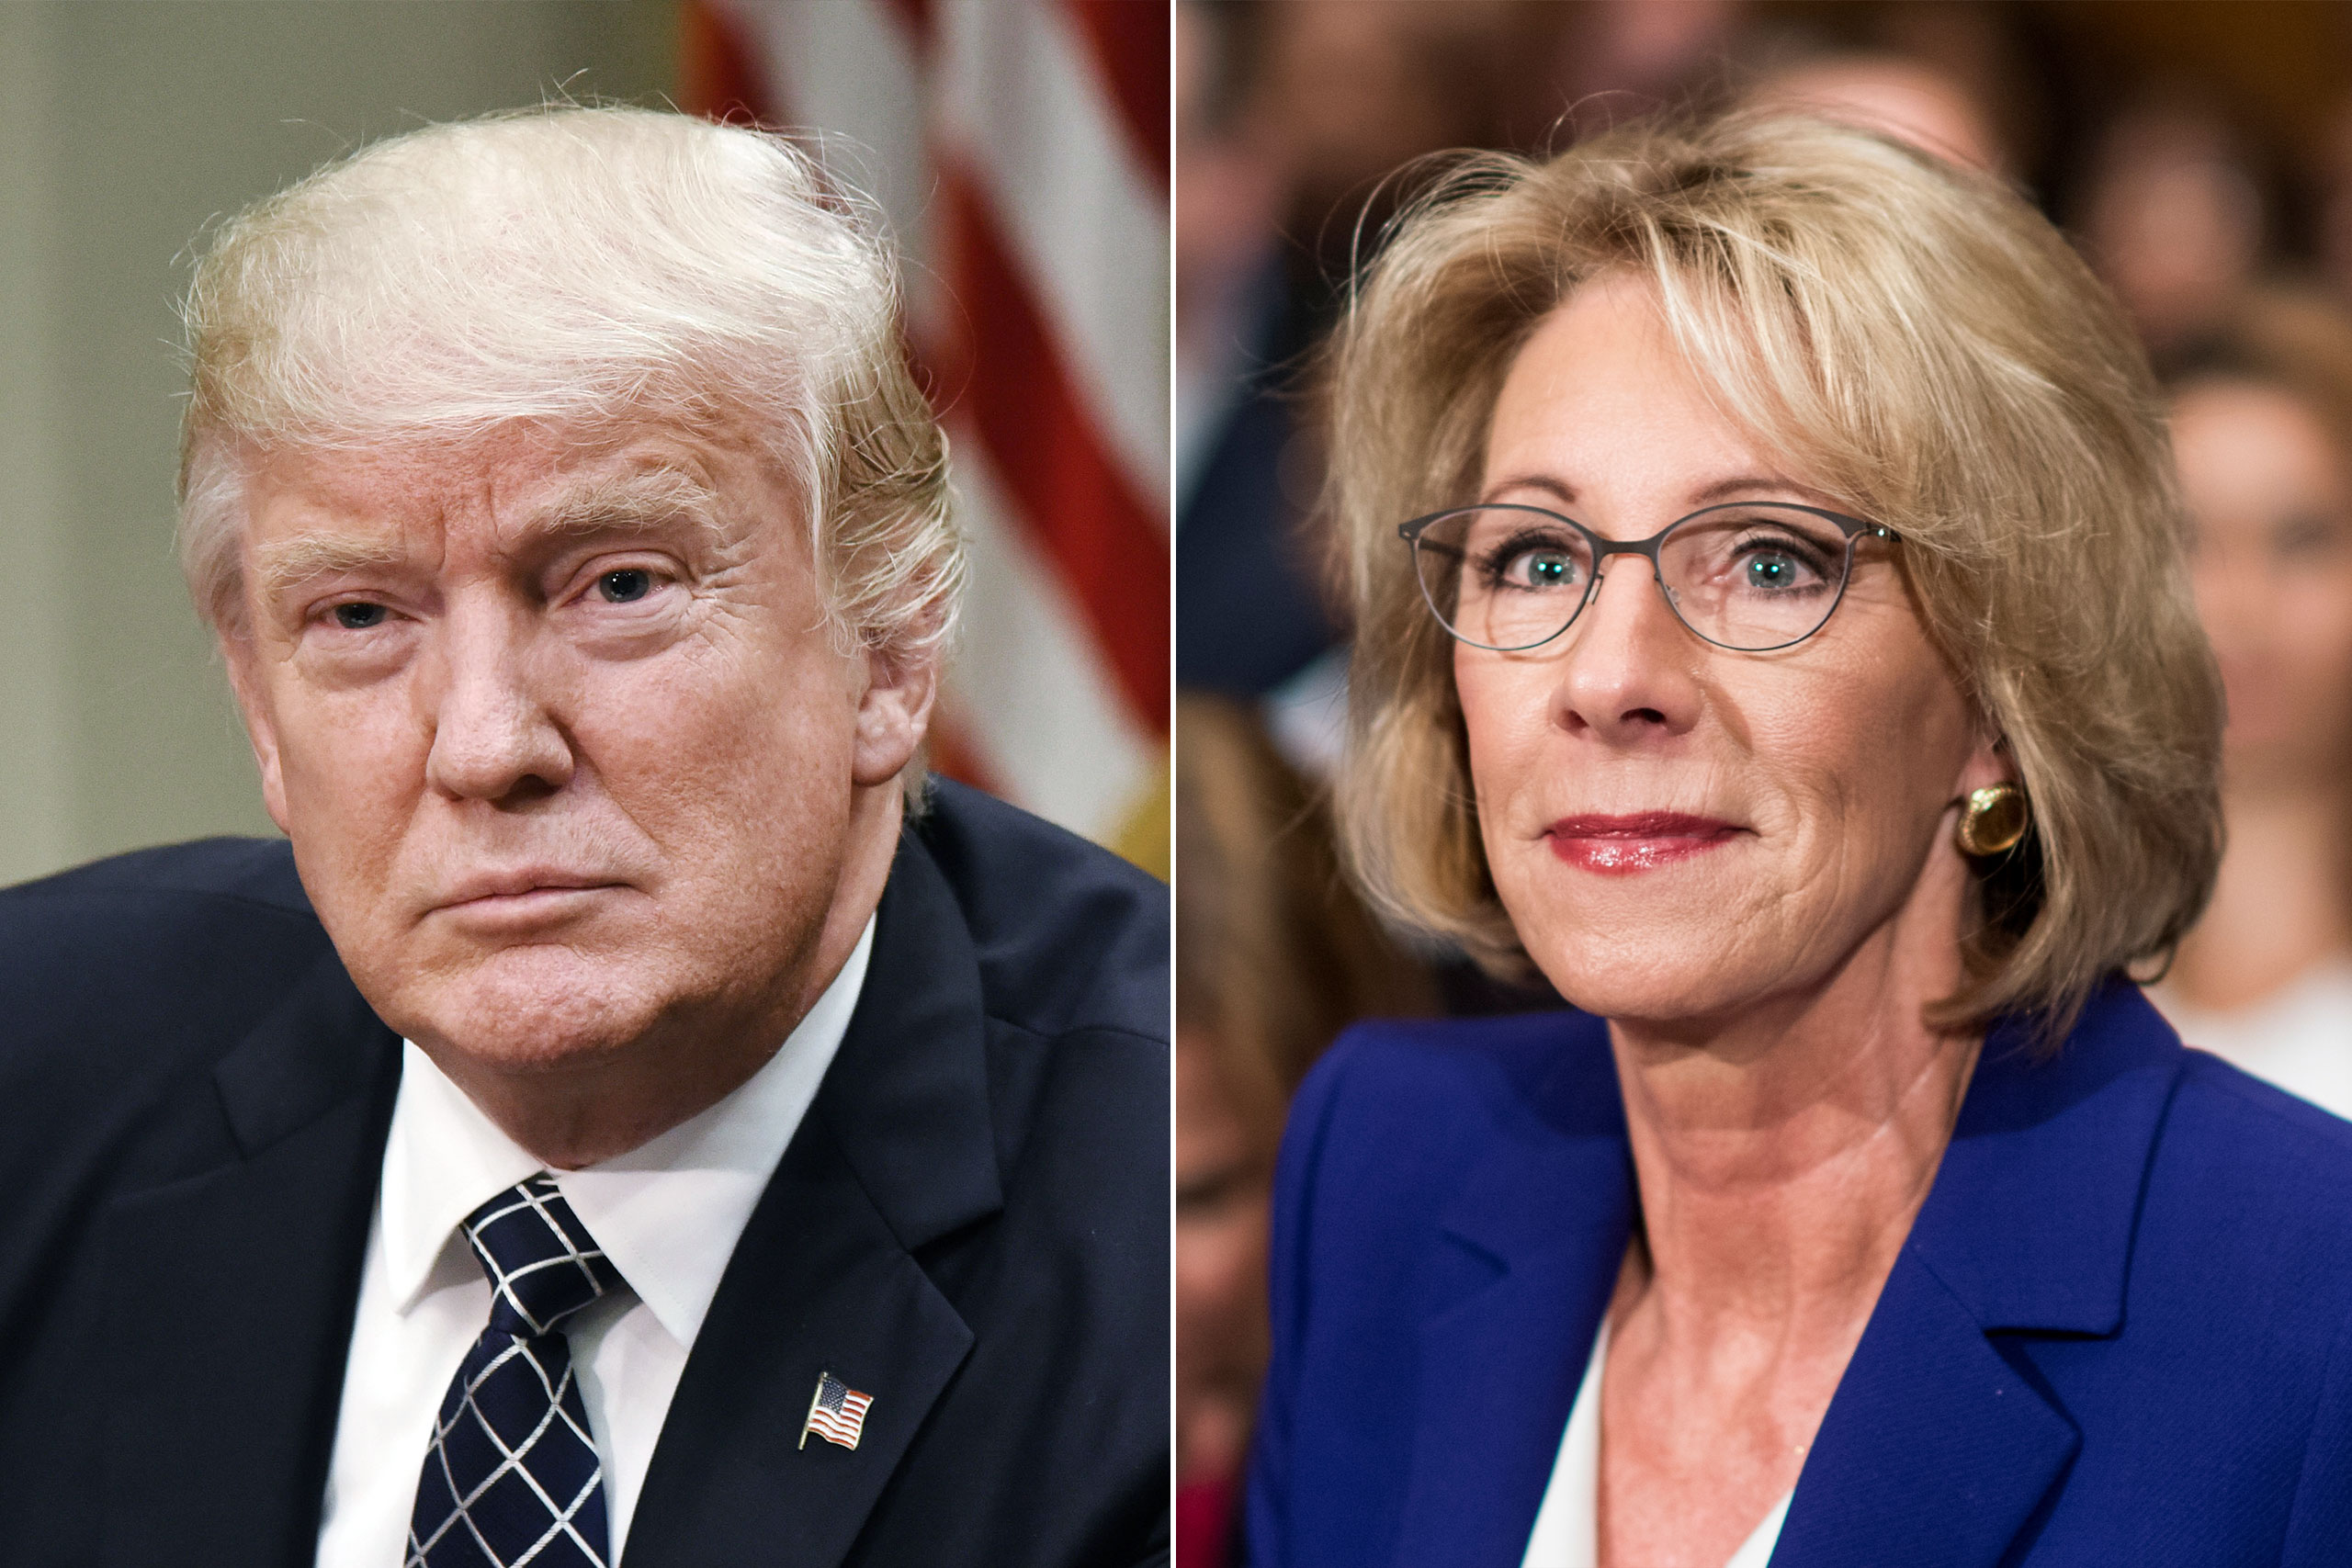 Donald Trump in Washington, DC, on April 25, 2017 (L); Betsy DeVos in Washington, DC, on Jan. 17, 2017. (Olivier Douliery—Getty Images (L); Bill Clark—Getty Images)